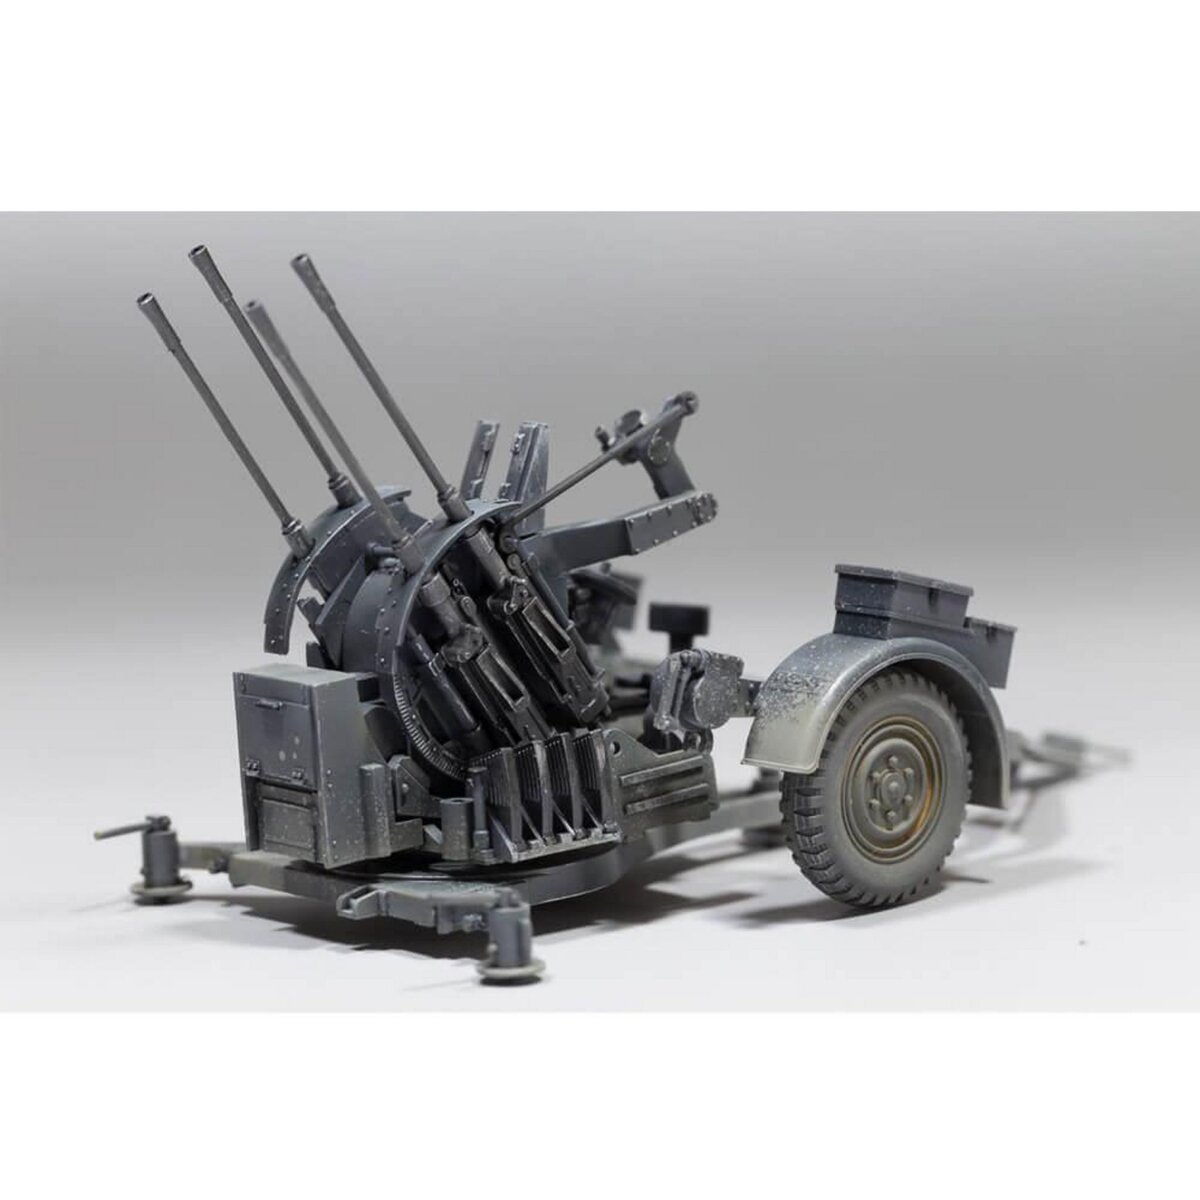 Tamiya Maquette véhicule militaire : Canon Flakvierling 38 2cm